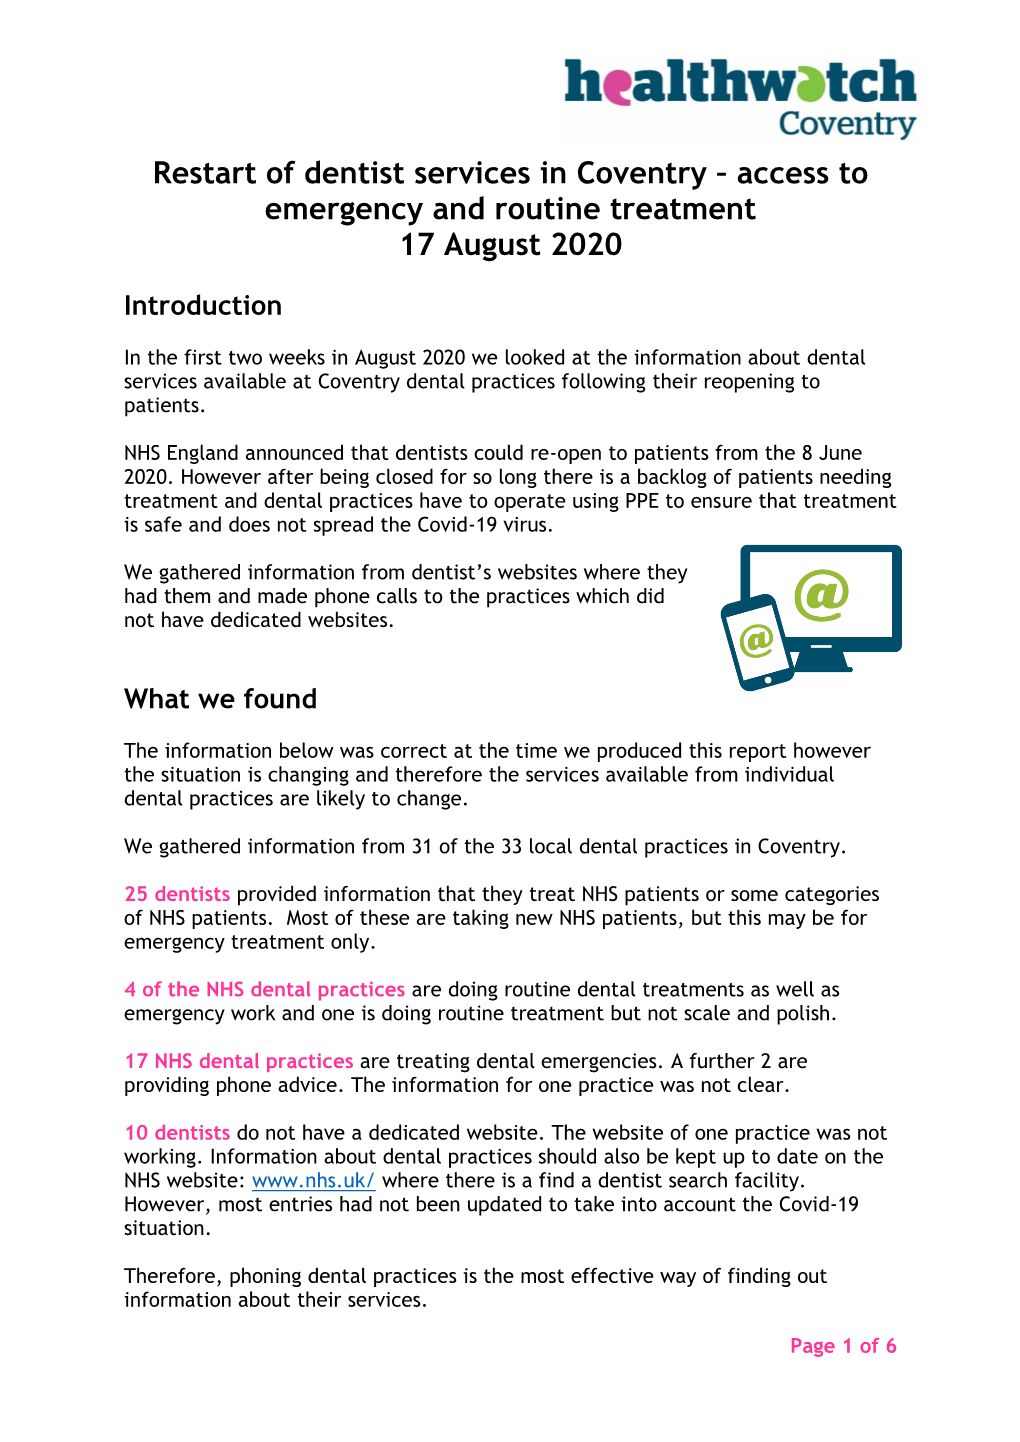 Restart of Dentist Services in Coventry – Access to Emergency and Routine Treatment 17 August 2020